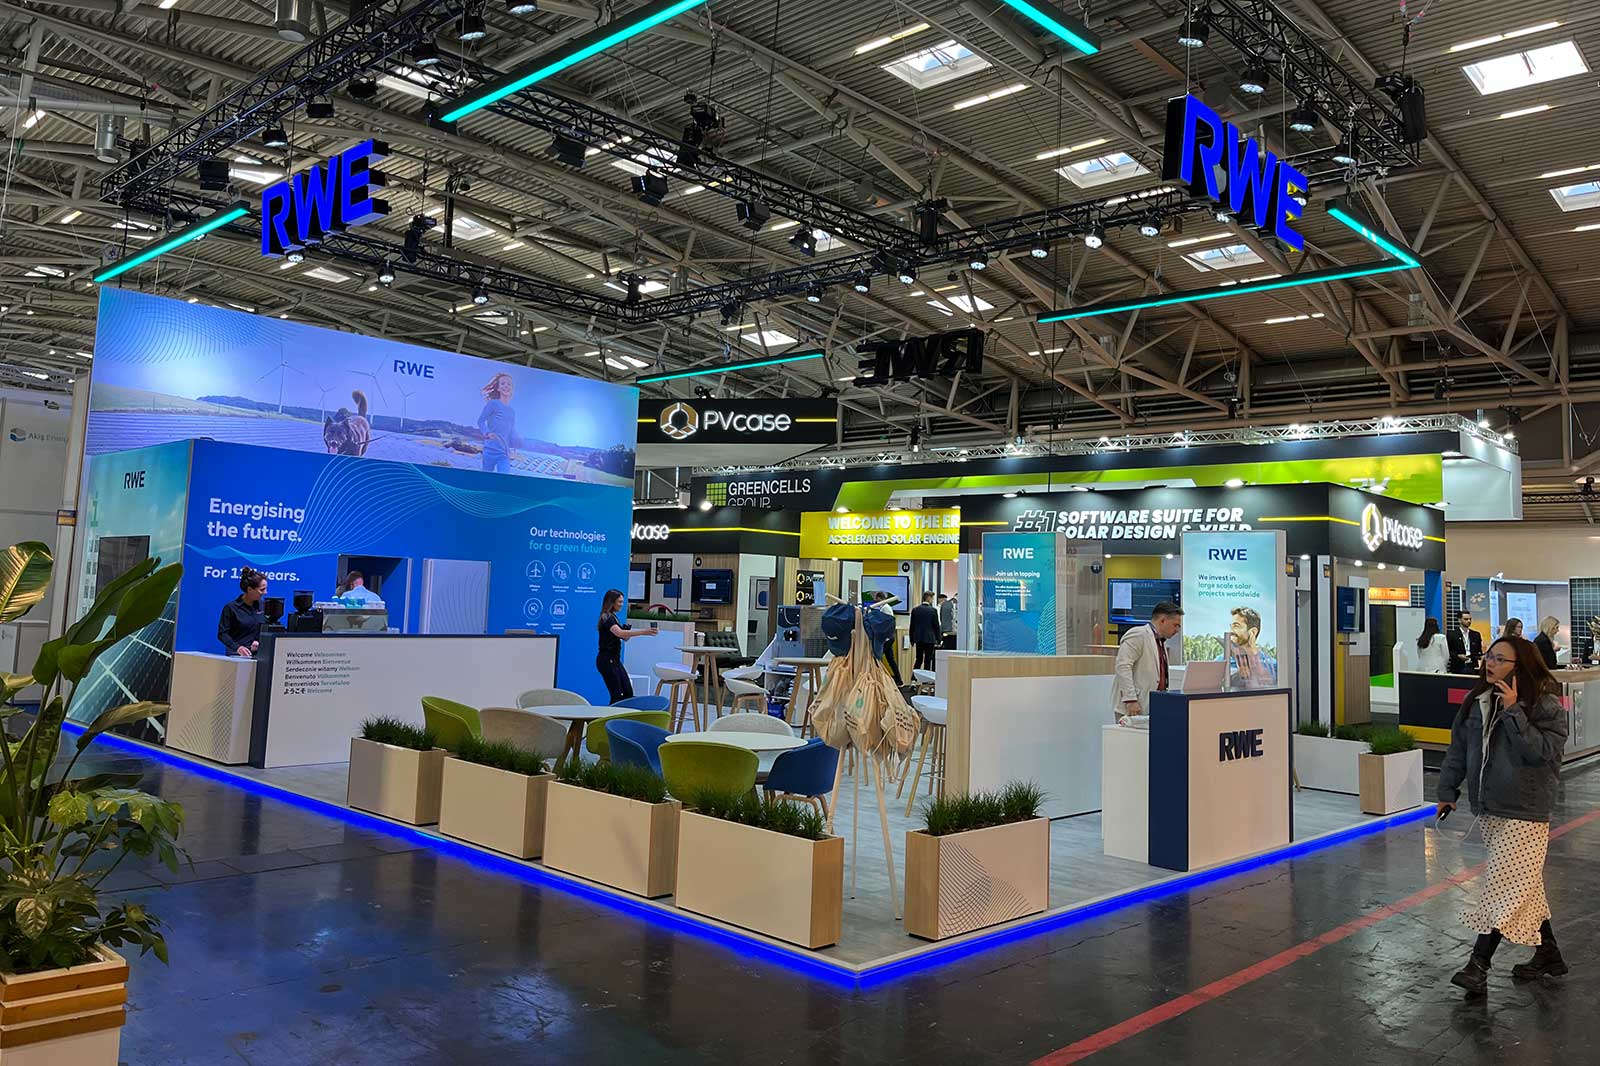 An RWE exhibition stand from the side.